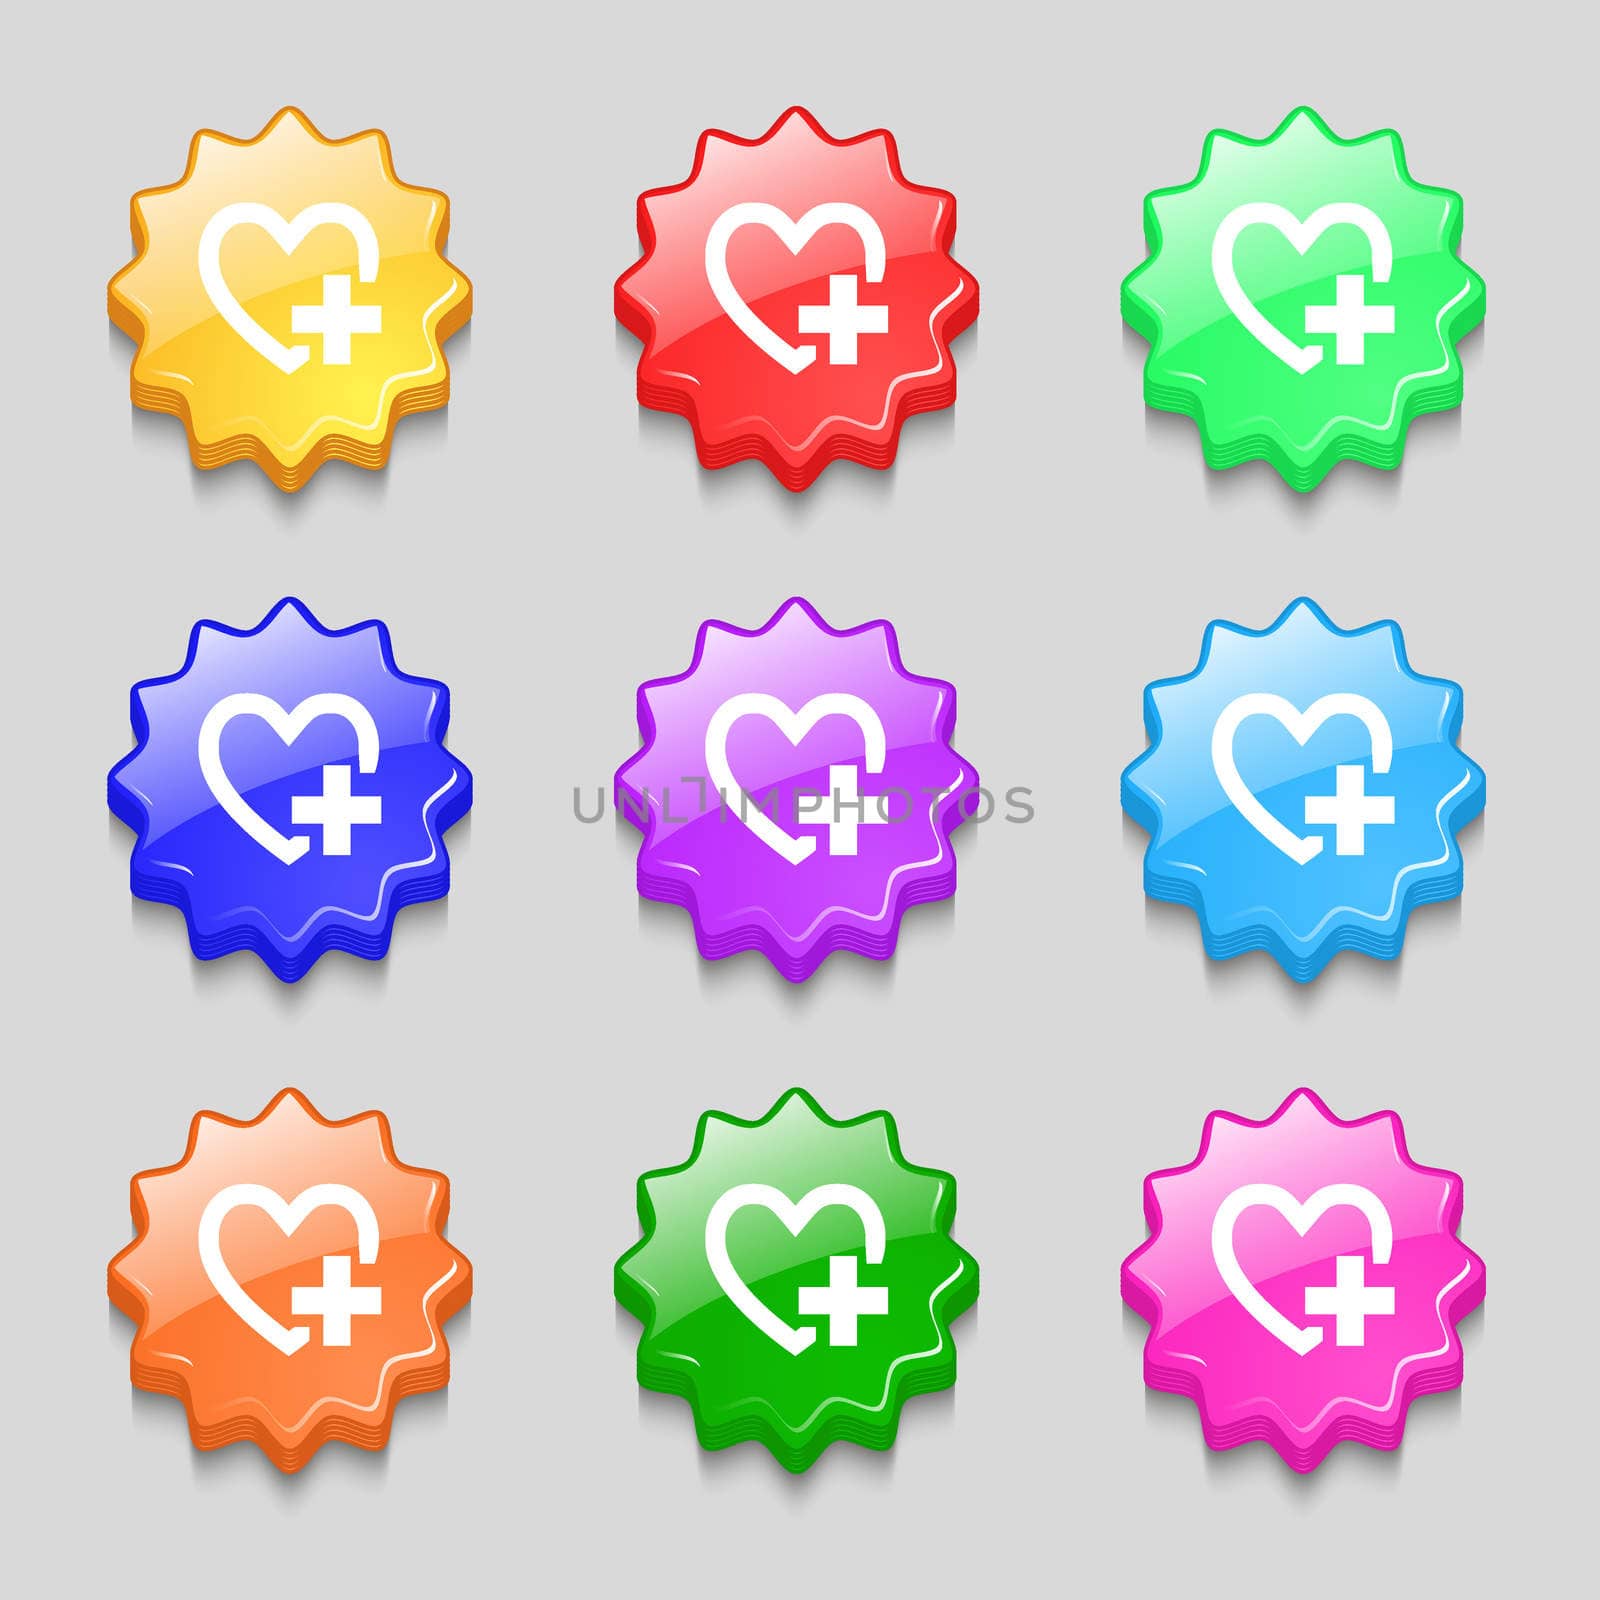 Heart sign icon. Love symbol. Symbols on nine wavy colourful buttons. illustration